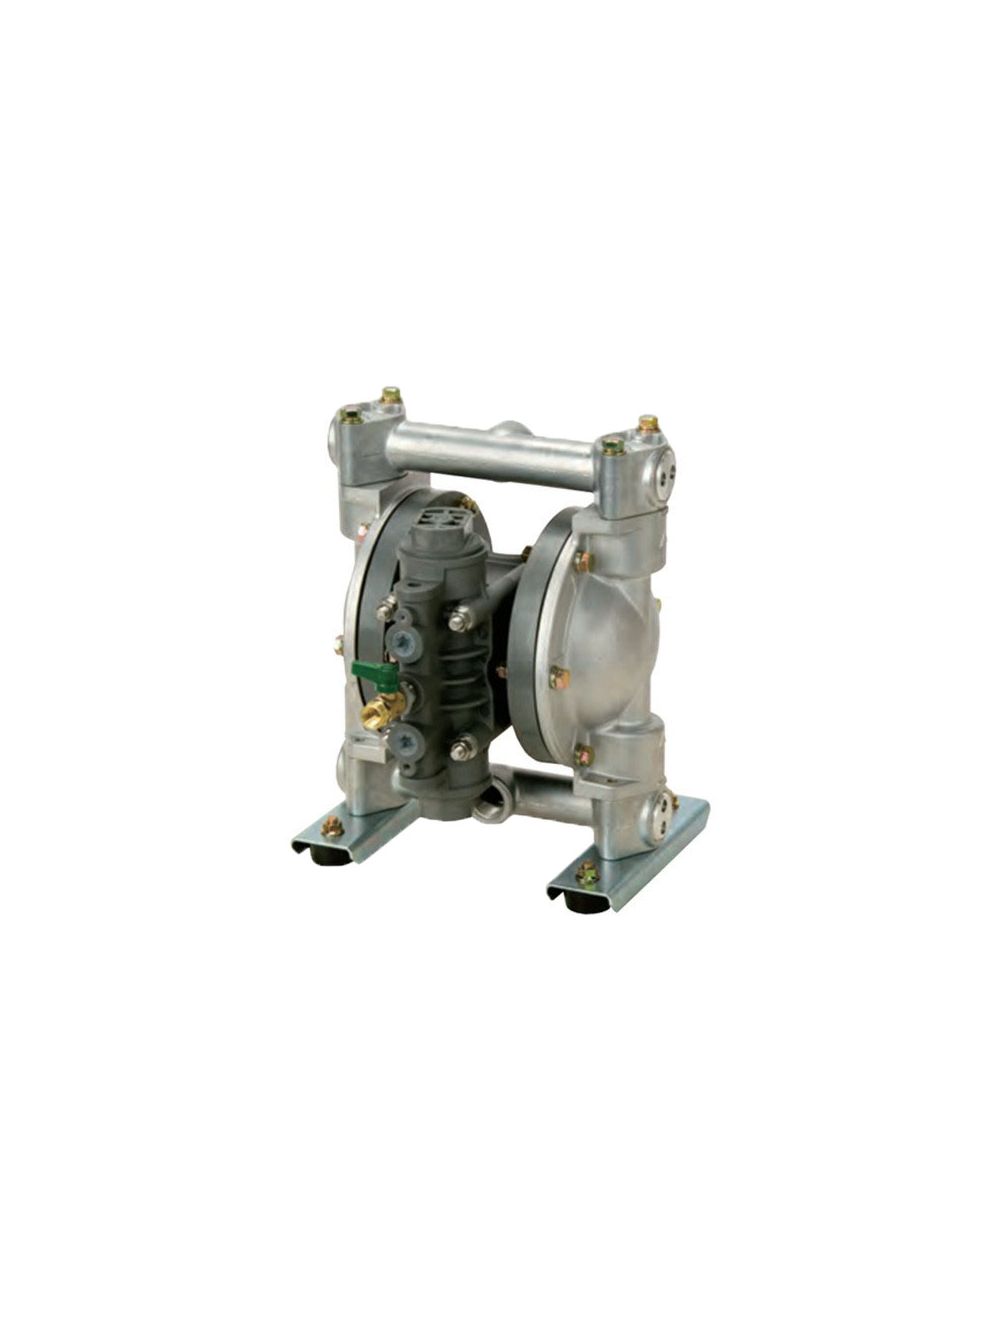 New In stock for sale, yamada Diaphragm Pump NDP-20BAE